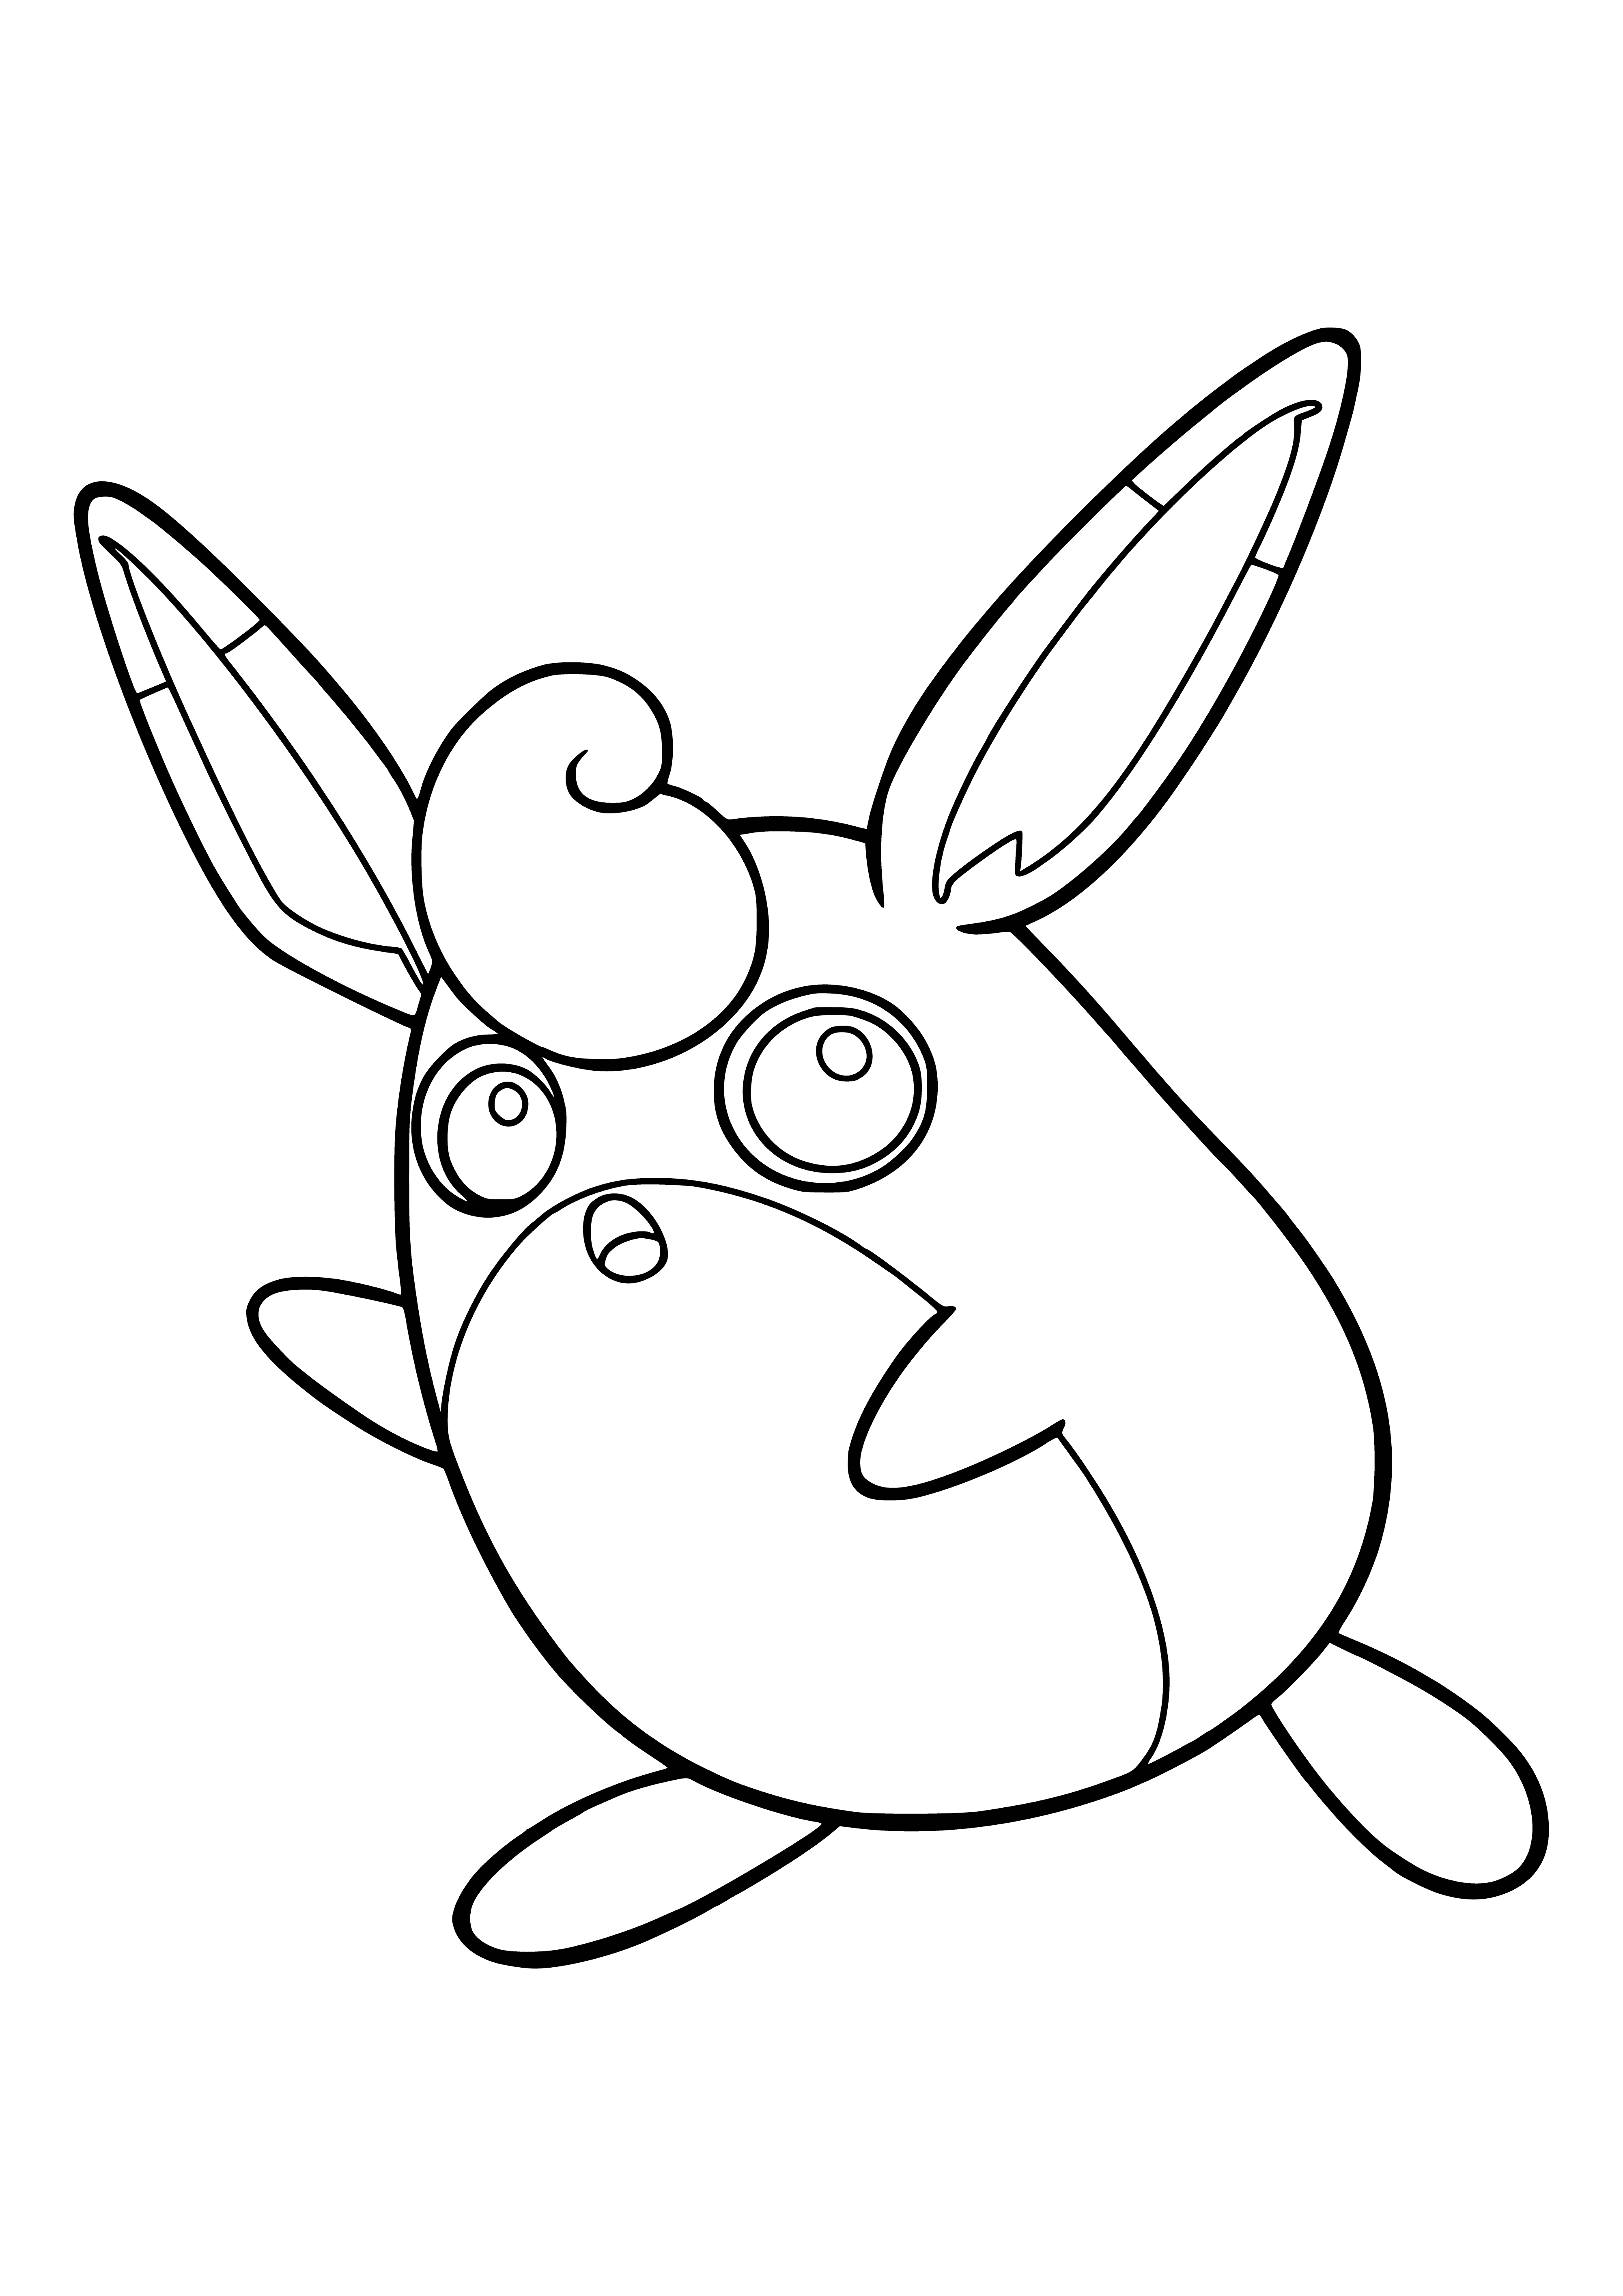 coloring page: Vigglitaff is a big, pink & fluffy Pokemon, evolving from Jigglypuff. It has big eyes, black nose, two pink ears & big, fluffy tail.